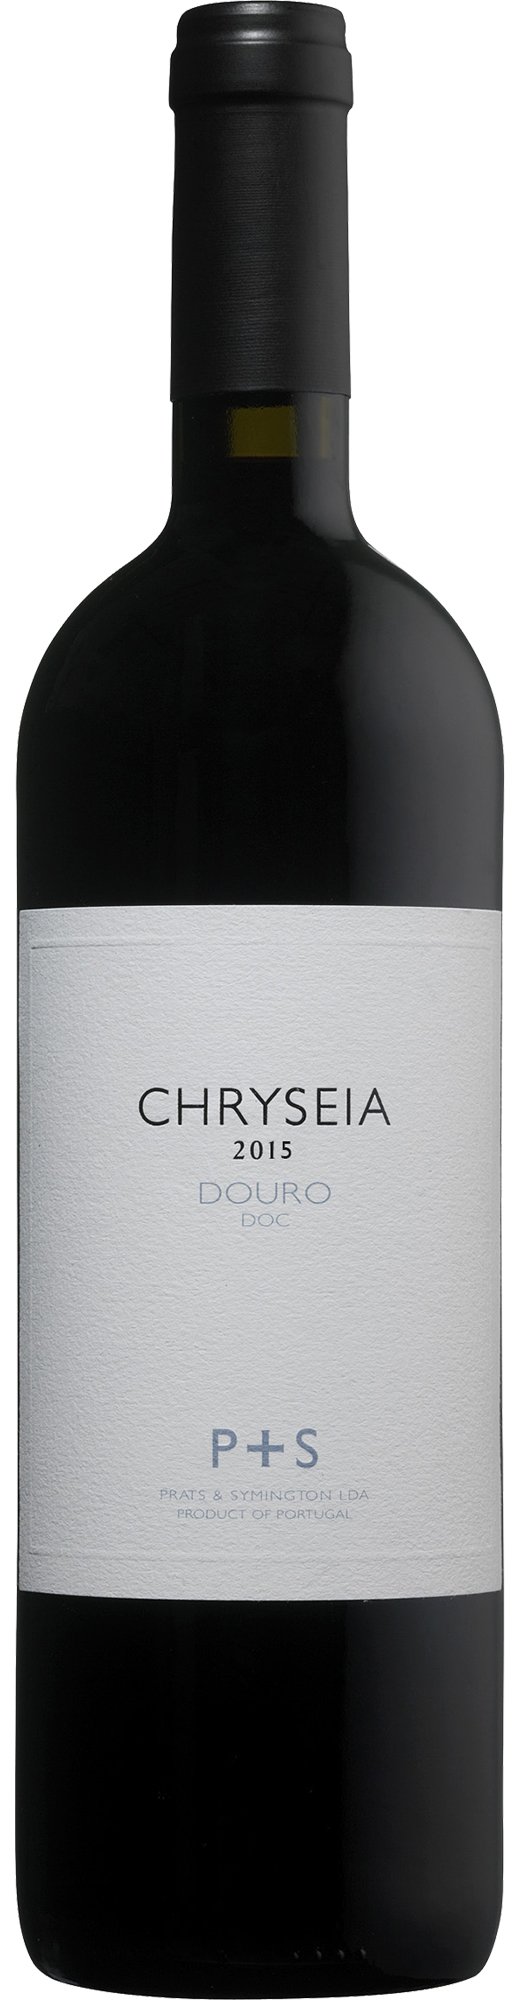 Product Image for P&S CHRYSEIA DOURO RED 2016 - MAGNUM (1.5L)